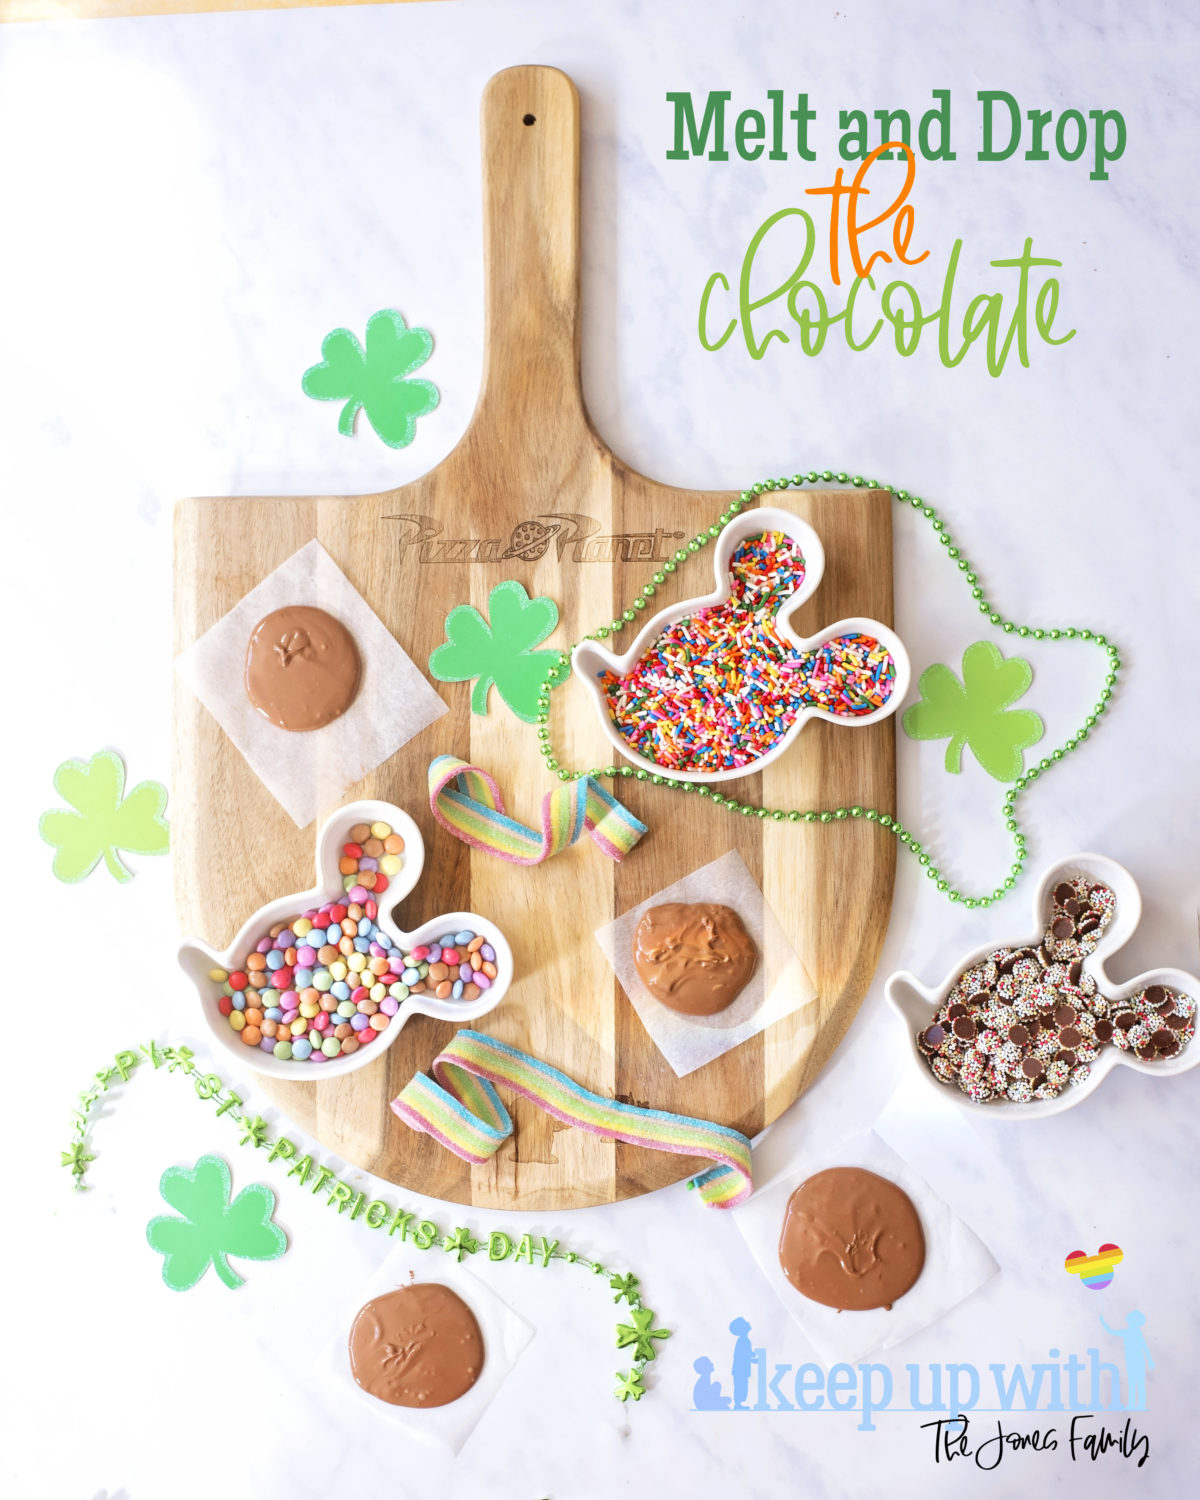 St patrick's day recipe ingredients for Leprechaun Chocolate Buttons